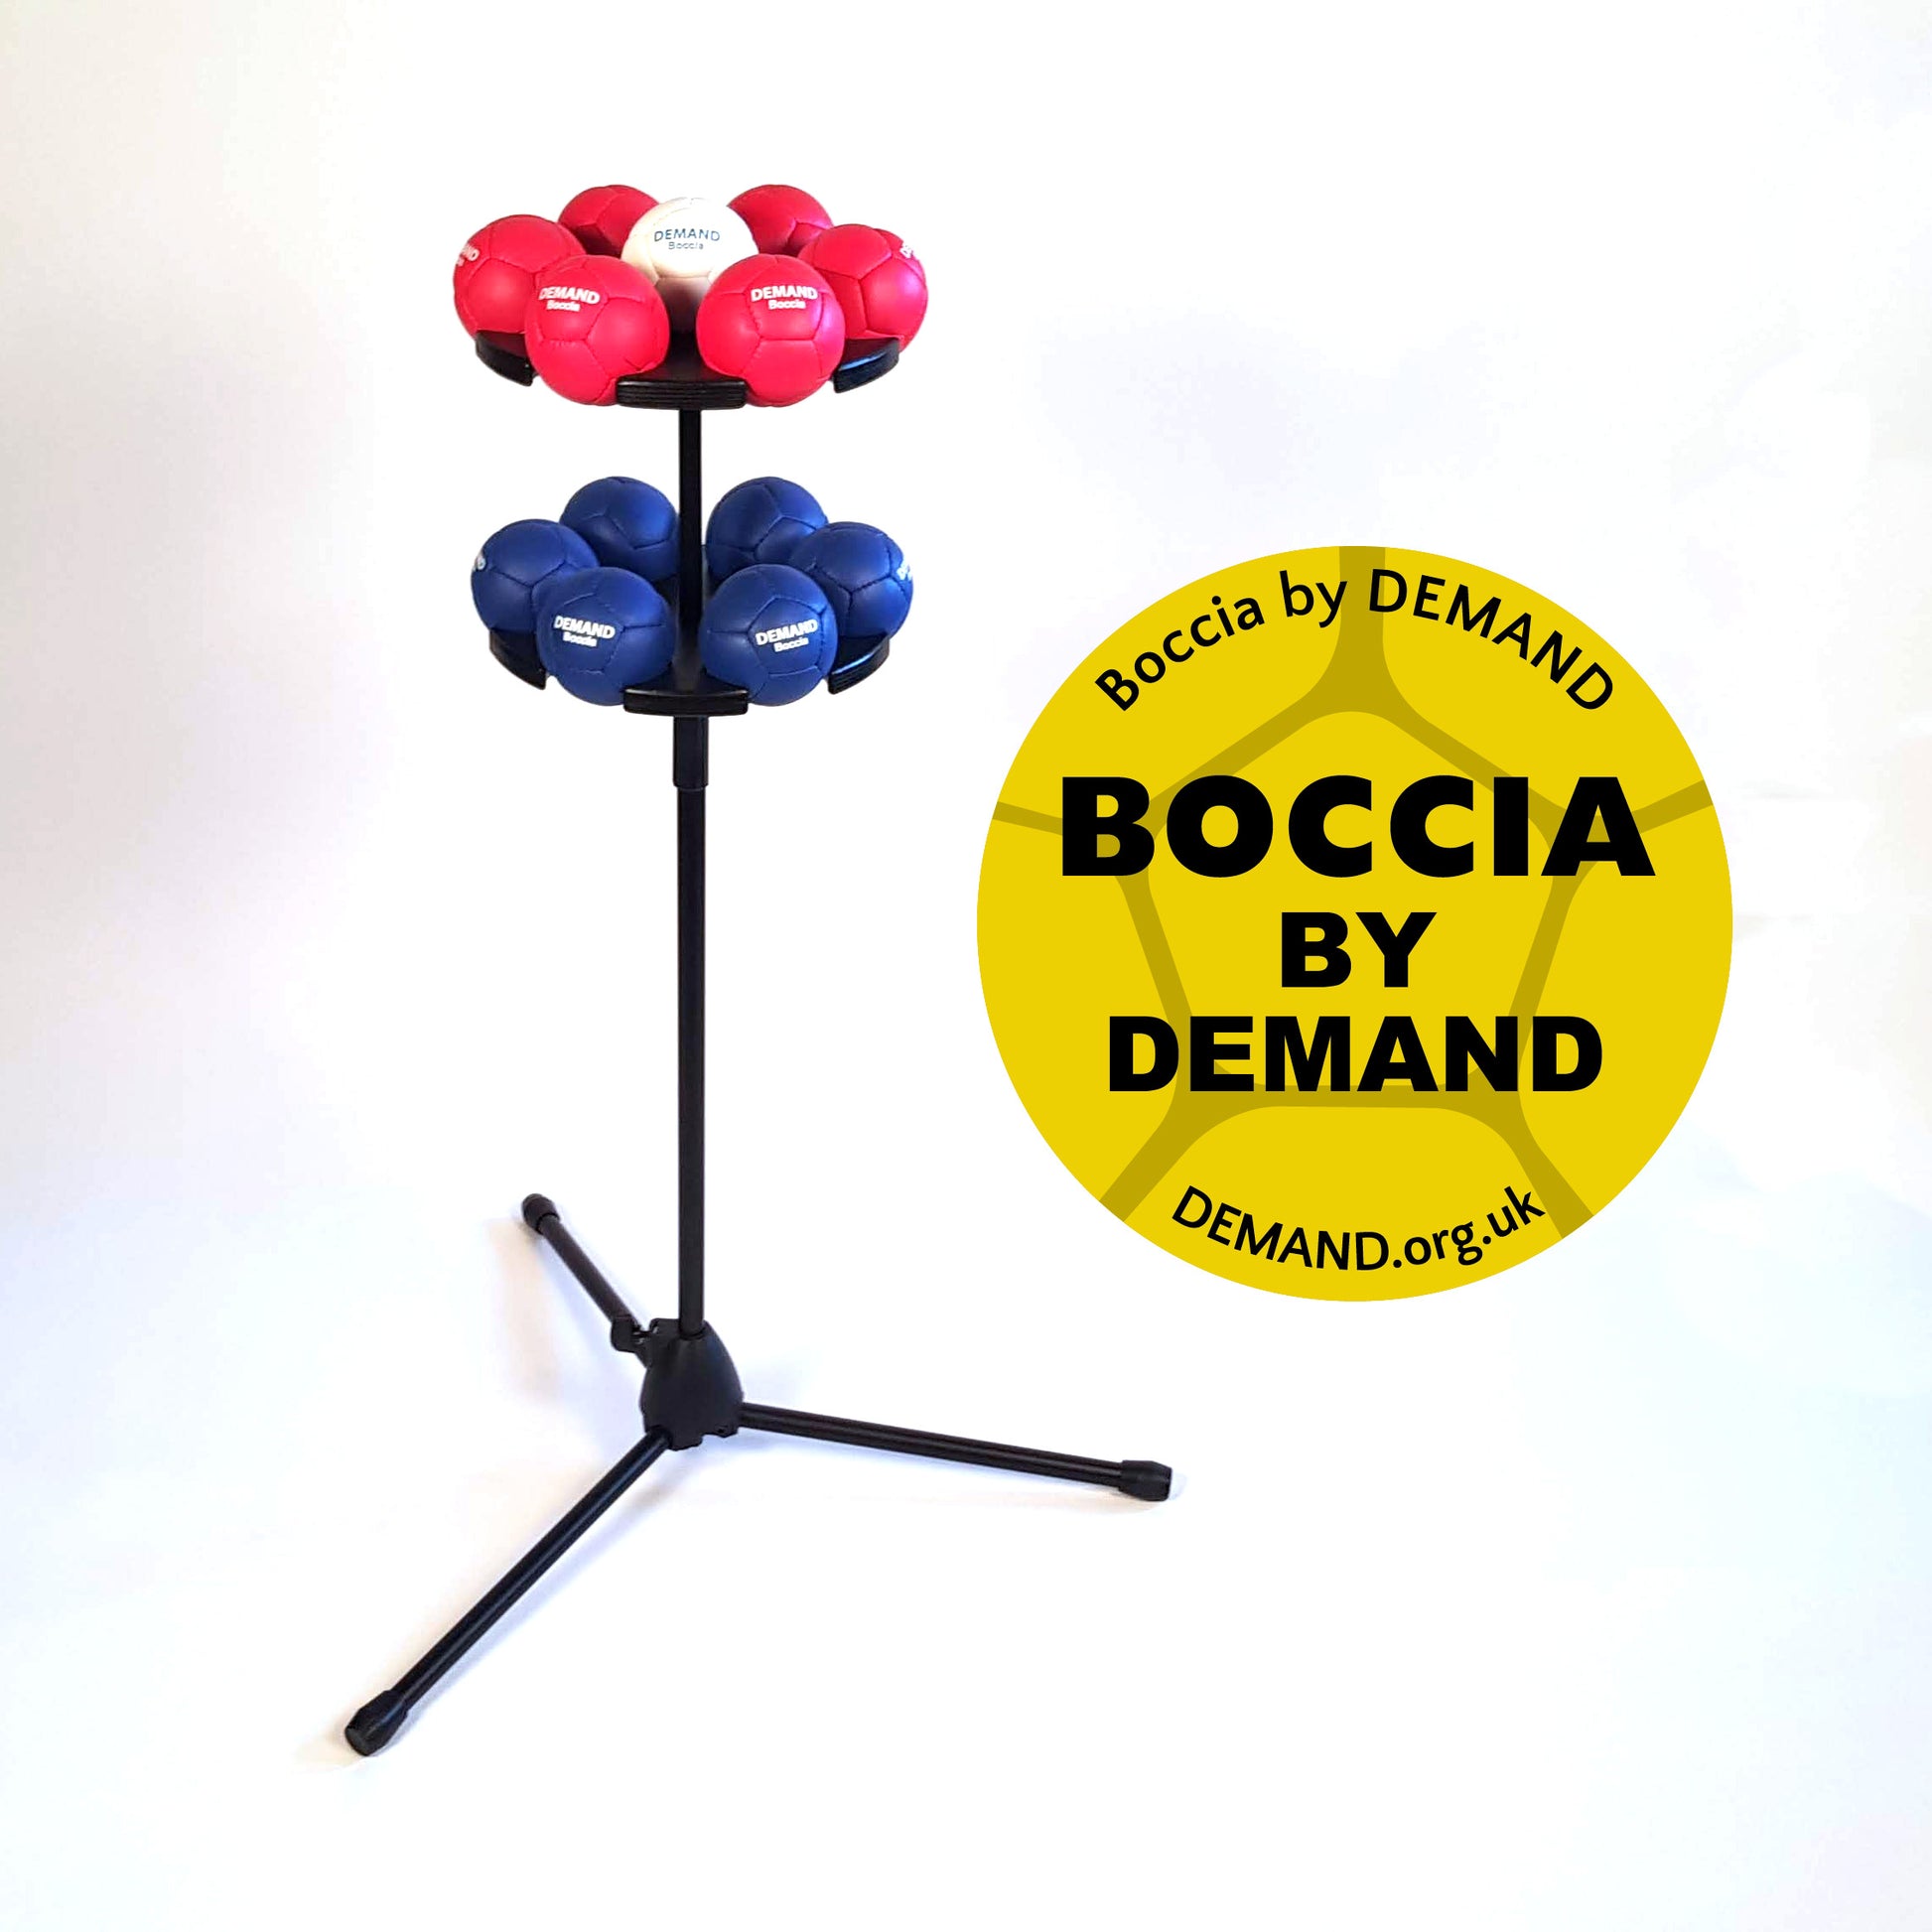 View of DEMAND Boccia ball stand with logo